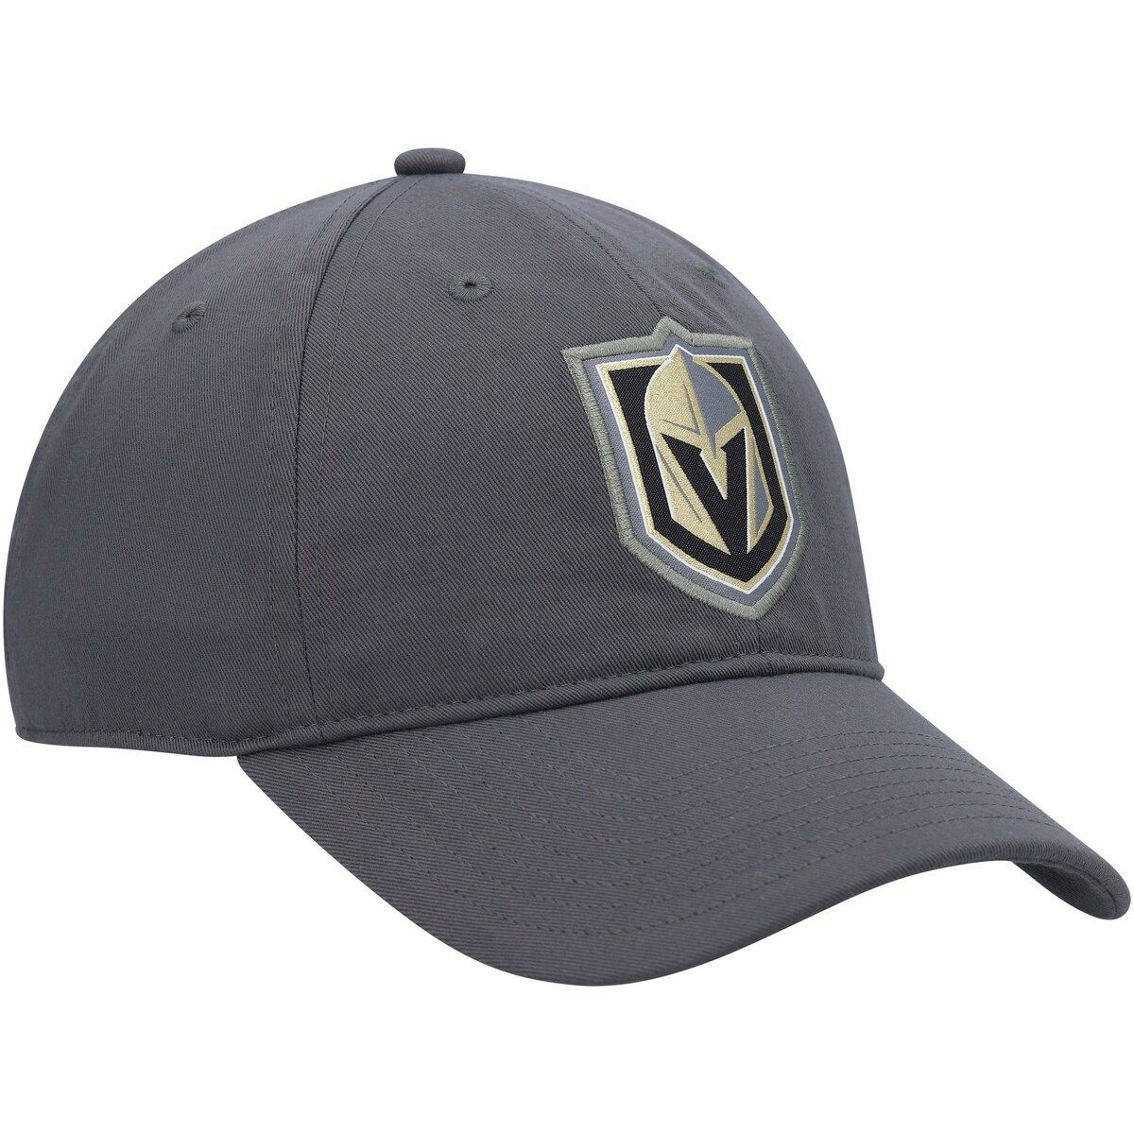 adidas Men's Charcoal Vegas Golden Knights Primary Logo Slouch Adjustable Hat - Image 4 of 4